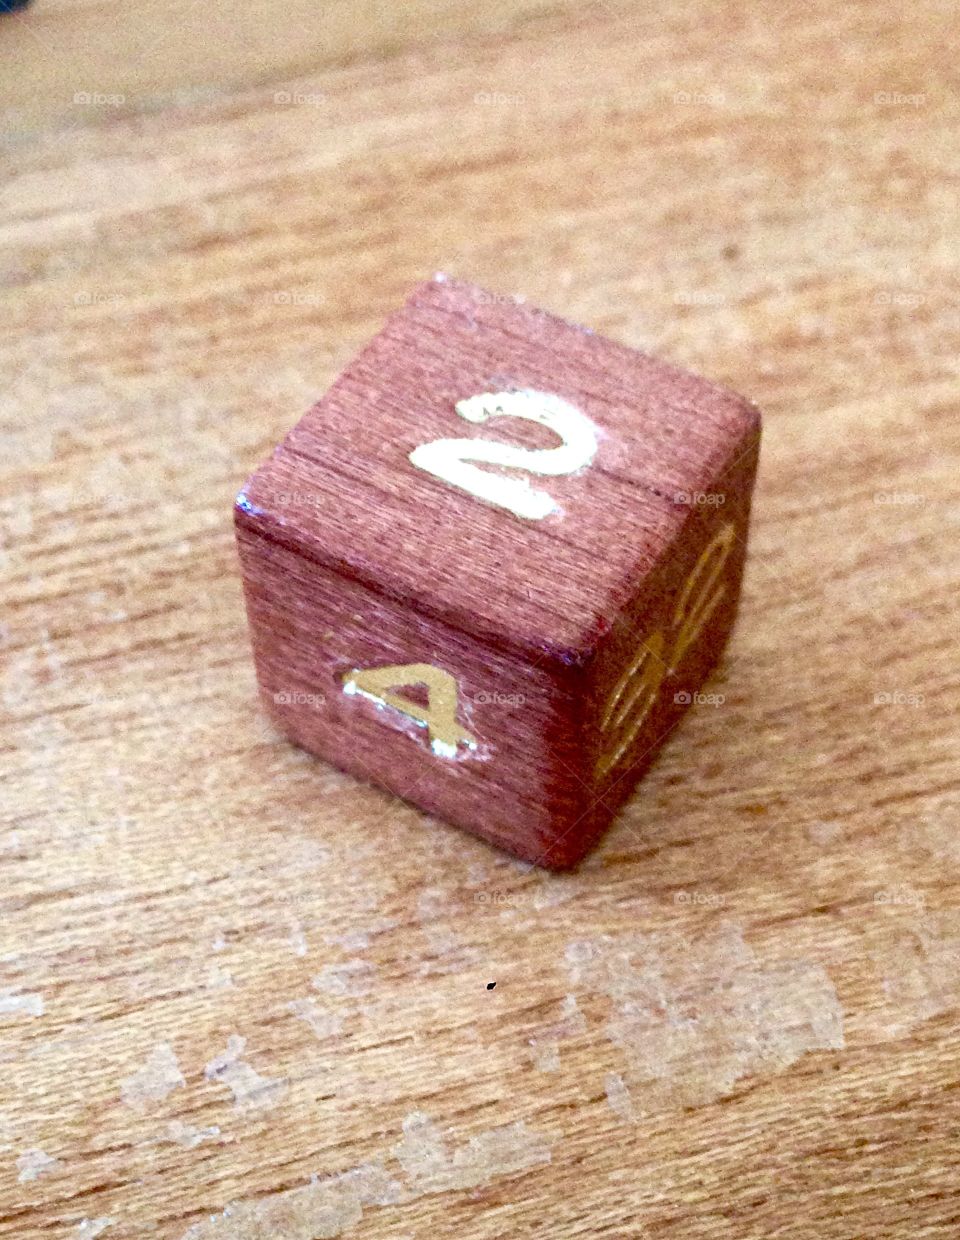 A Wooden dice